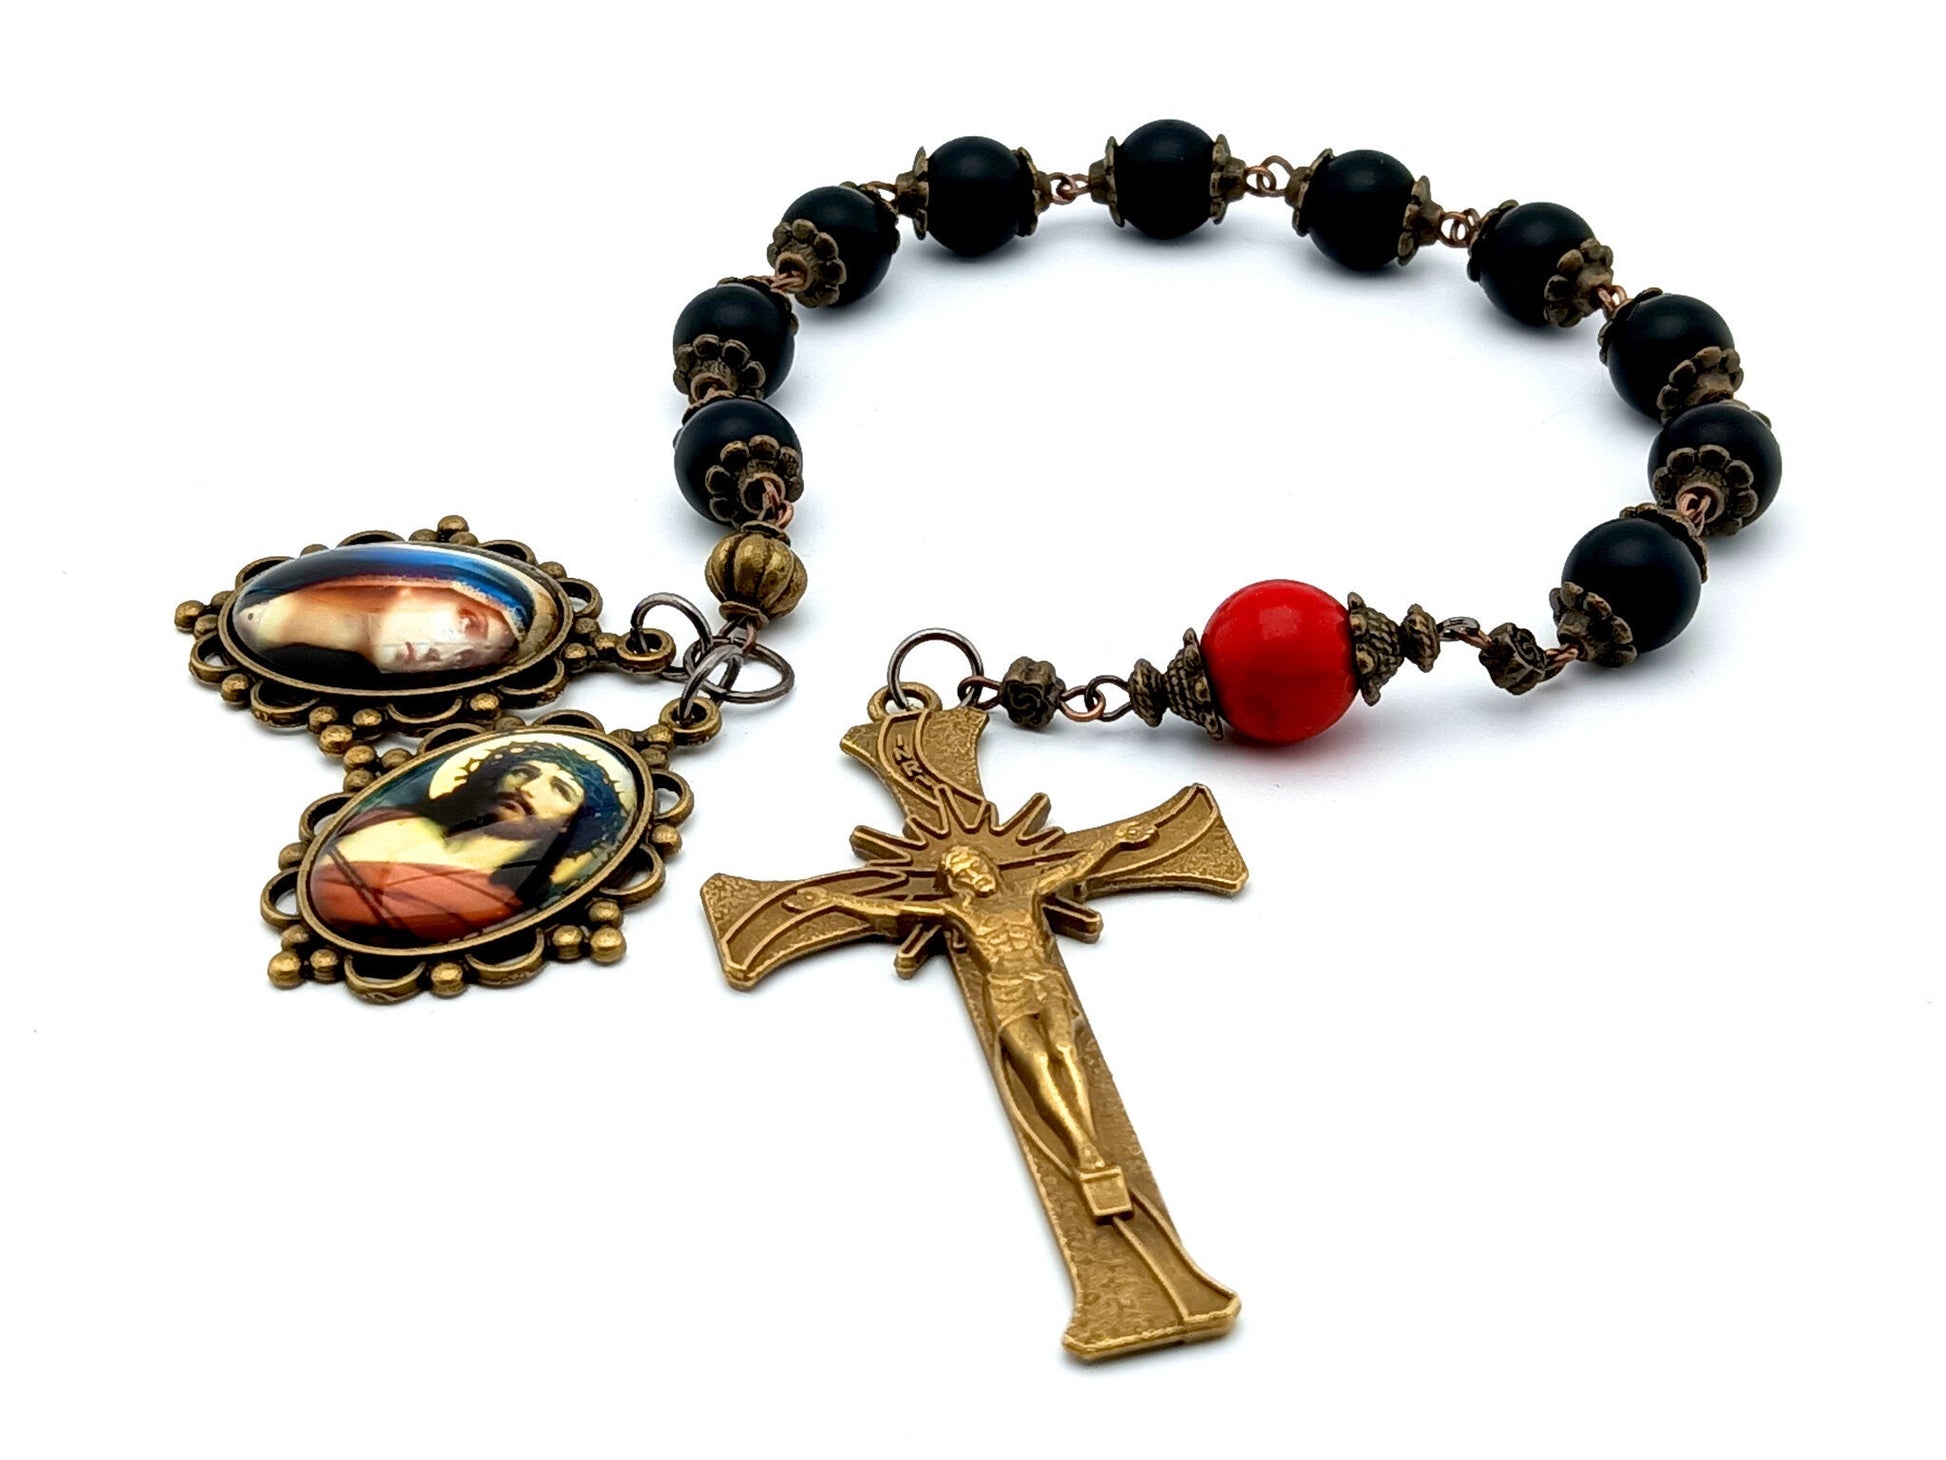 Crown of Thorns unique rosary beads single decade rosary with onyx and red gemstone beads, bronze crucifix and Christs passion and Sorrowful Mother picture medals.